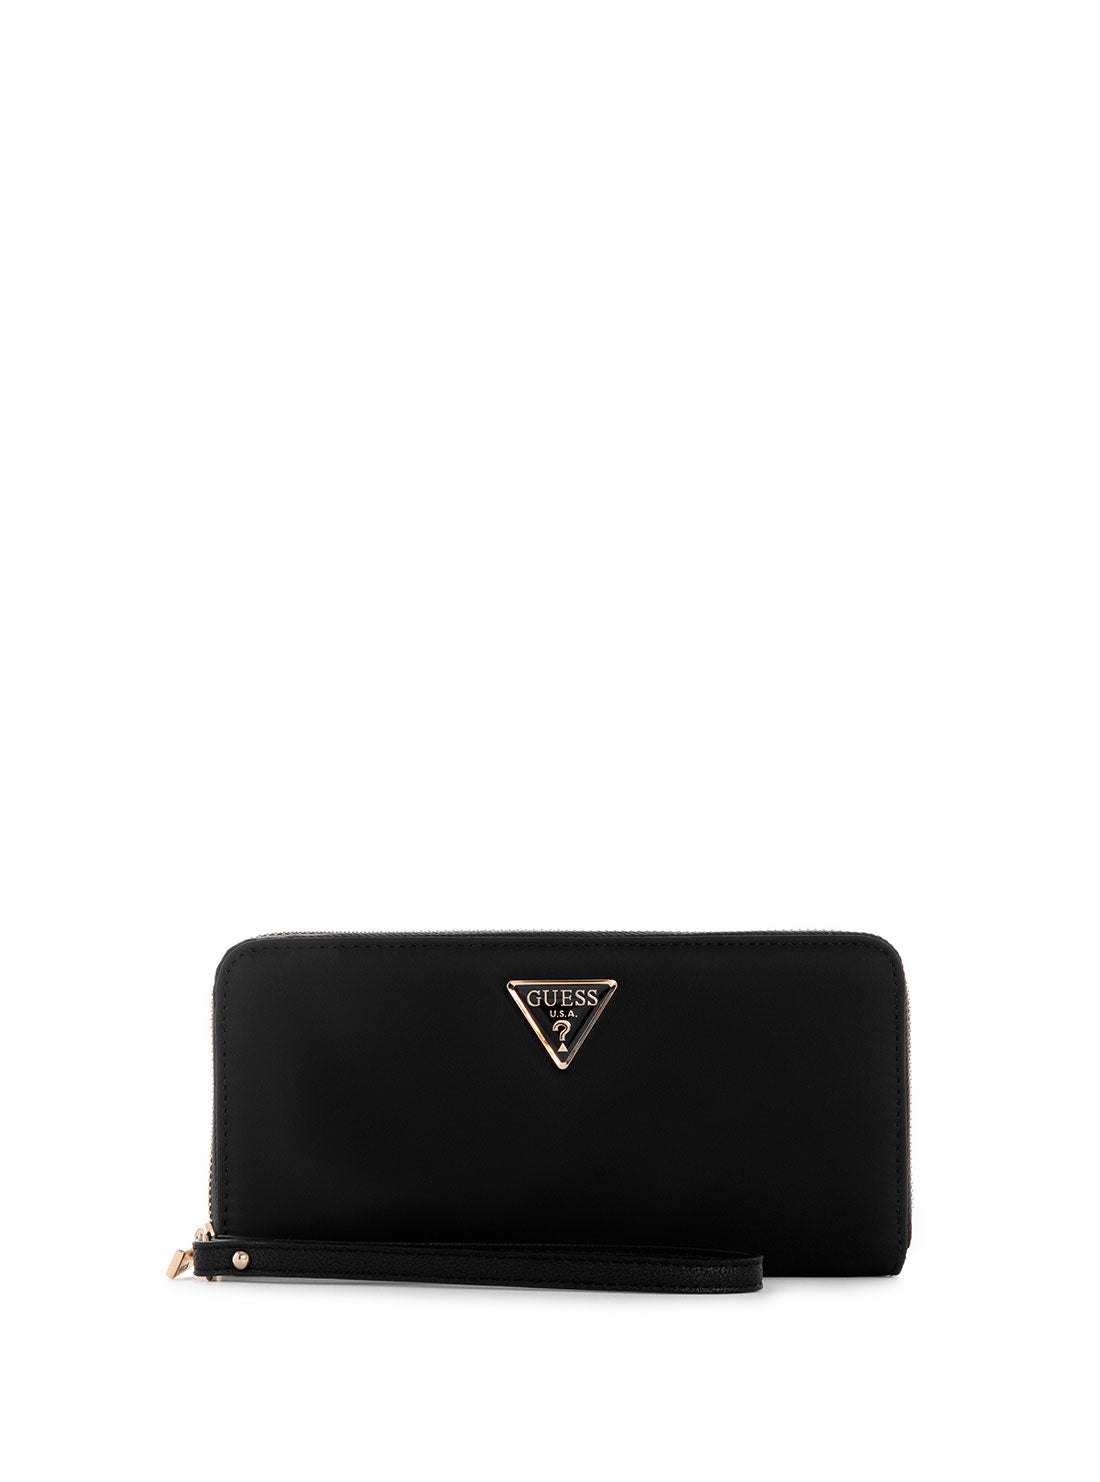 GUESS Women's Eco Black Gemma Large Wallet EYG839546 Front View